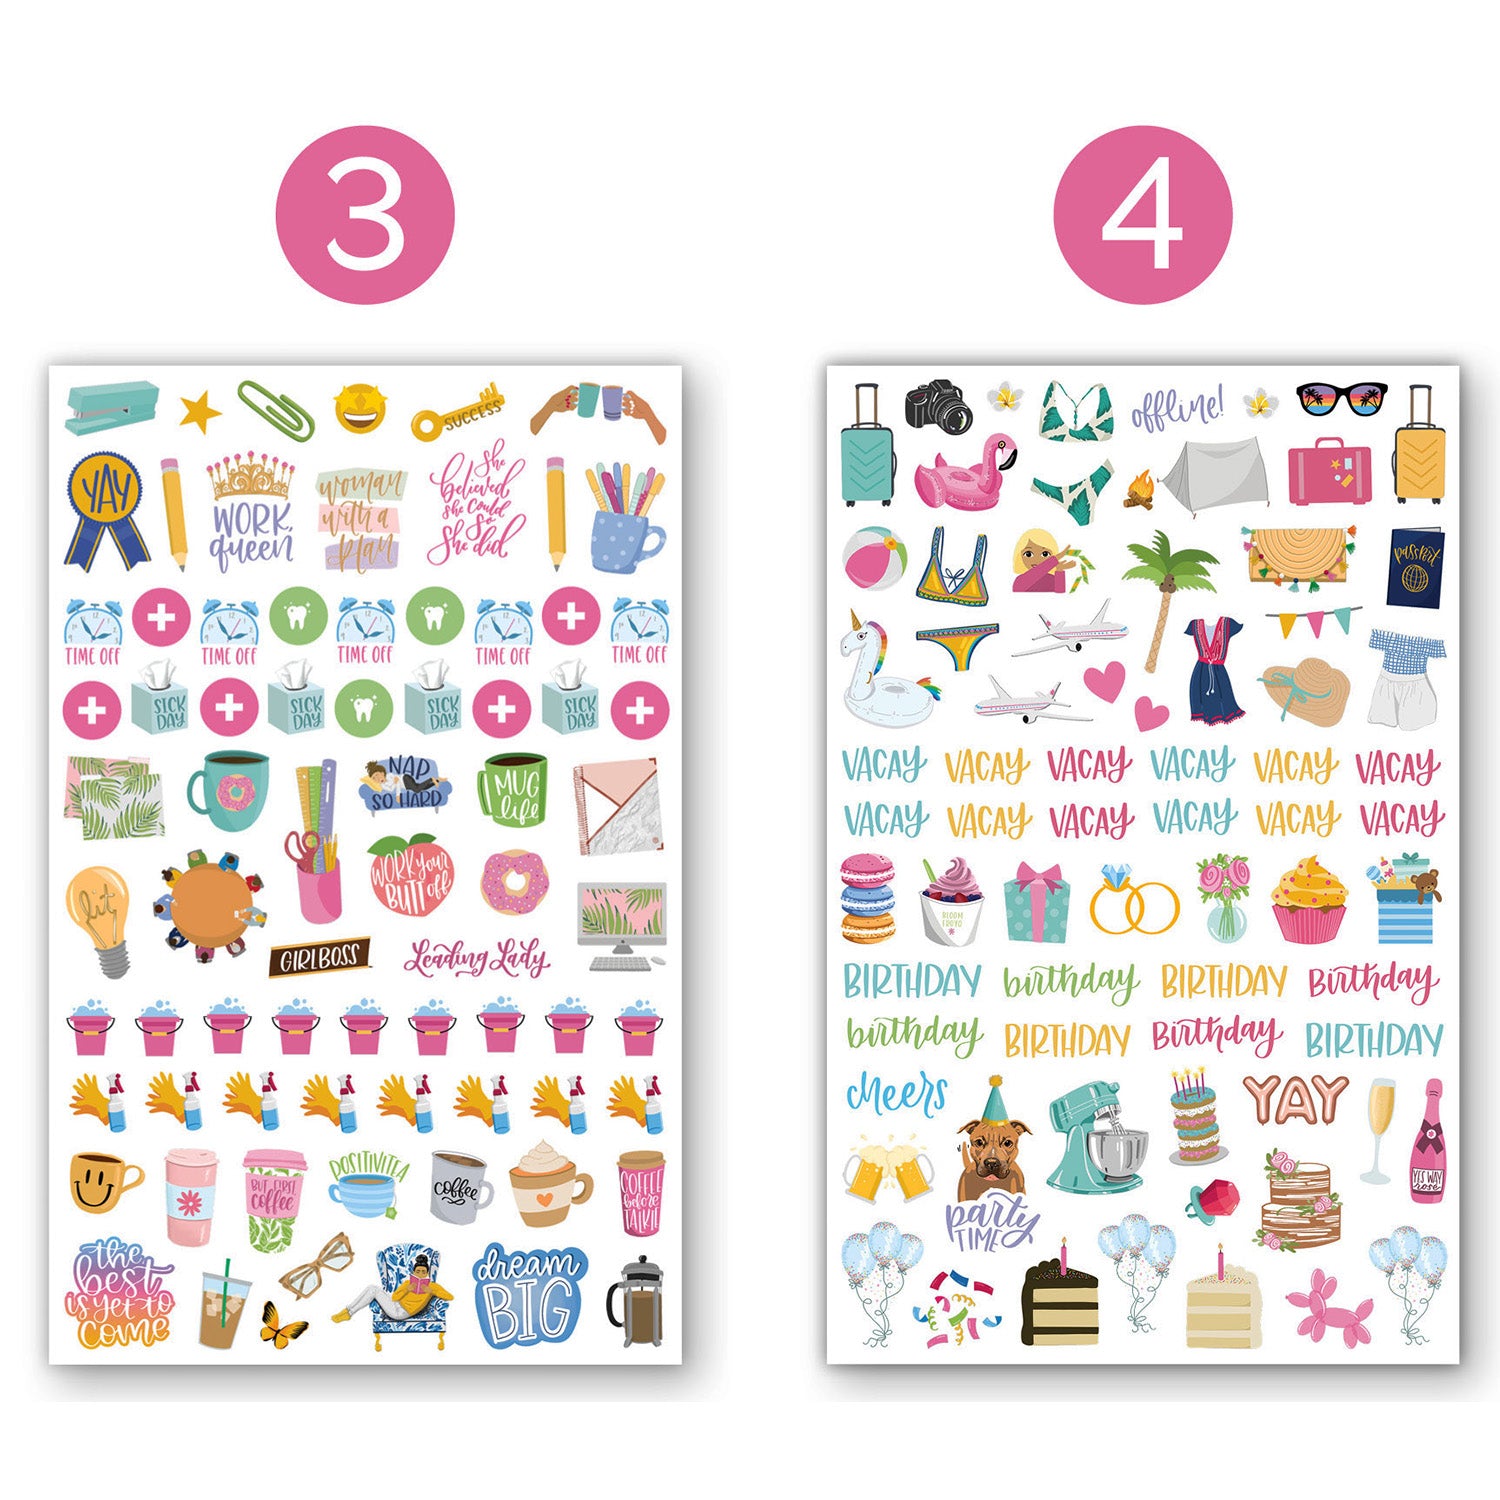 Classic Planner Stickers - bloom daily planners®